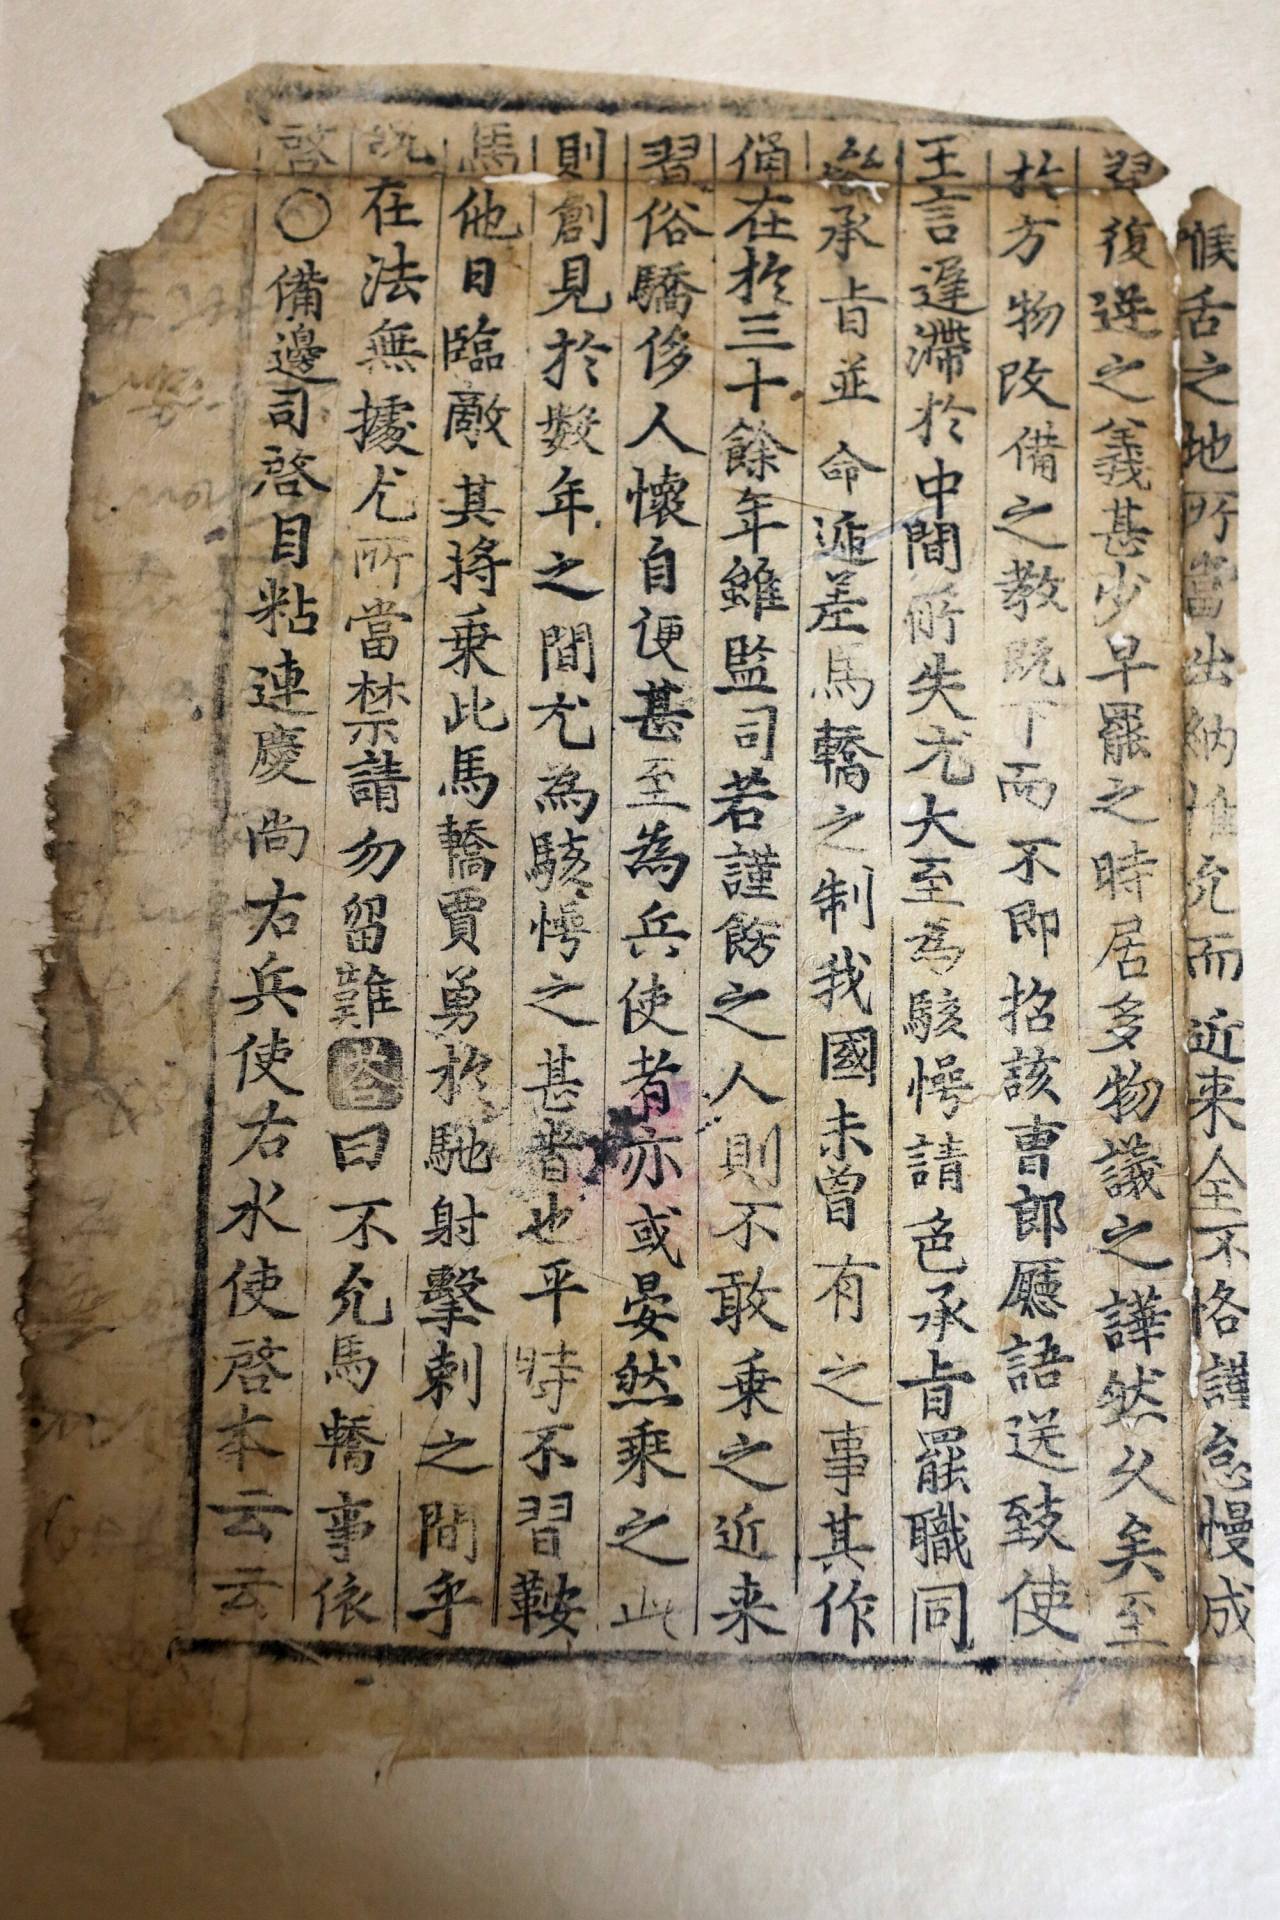 The November 1577, newspaper, which is the world’s first daily commercial newspaper printed with movable types, shows several variations of the Hanja character horse (馬) in varying sizes and style. Photo © 2020 Hyungwon Kang